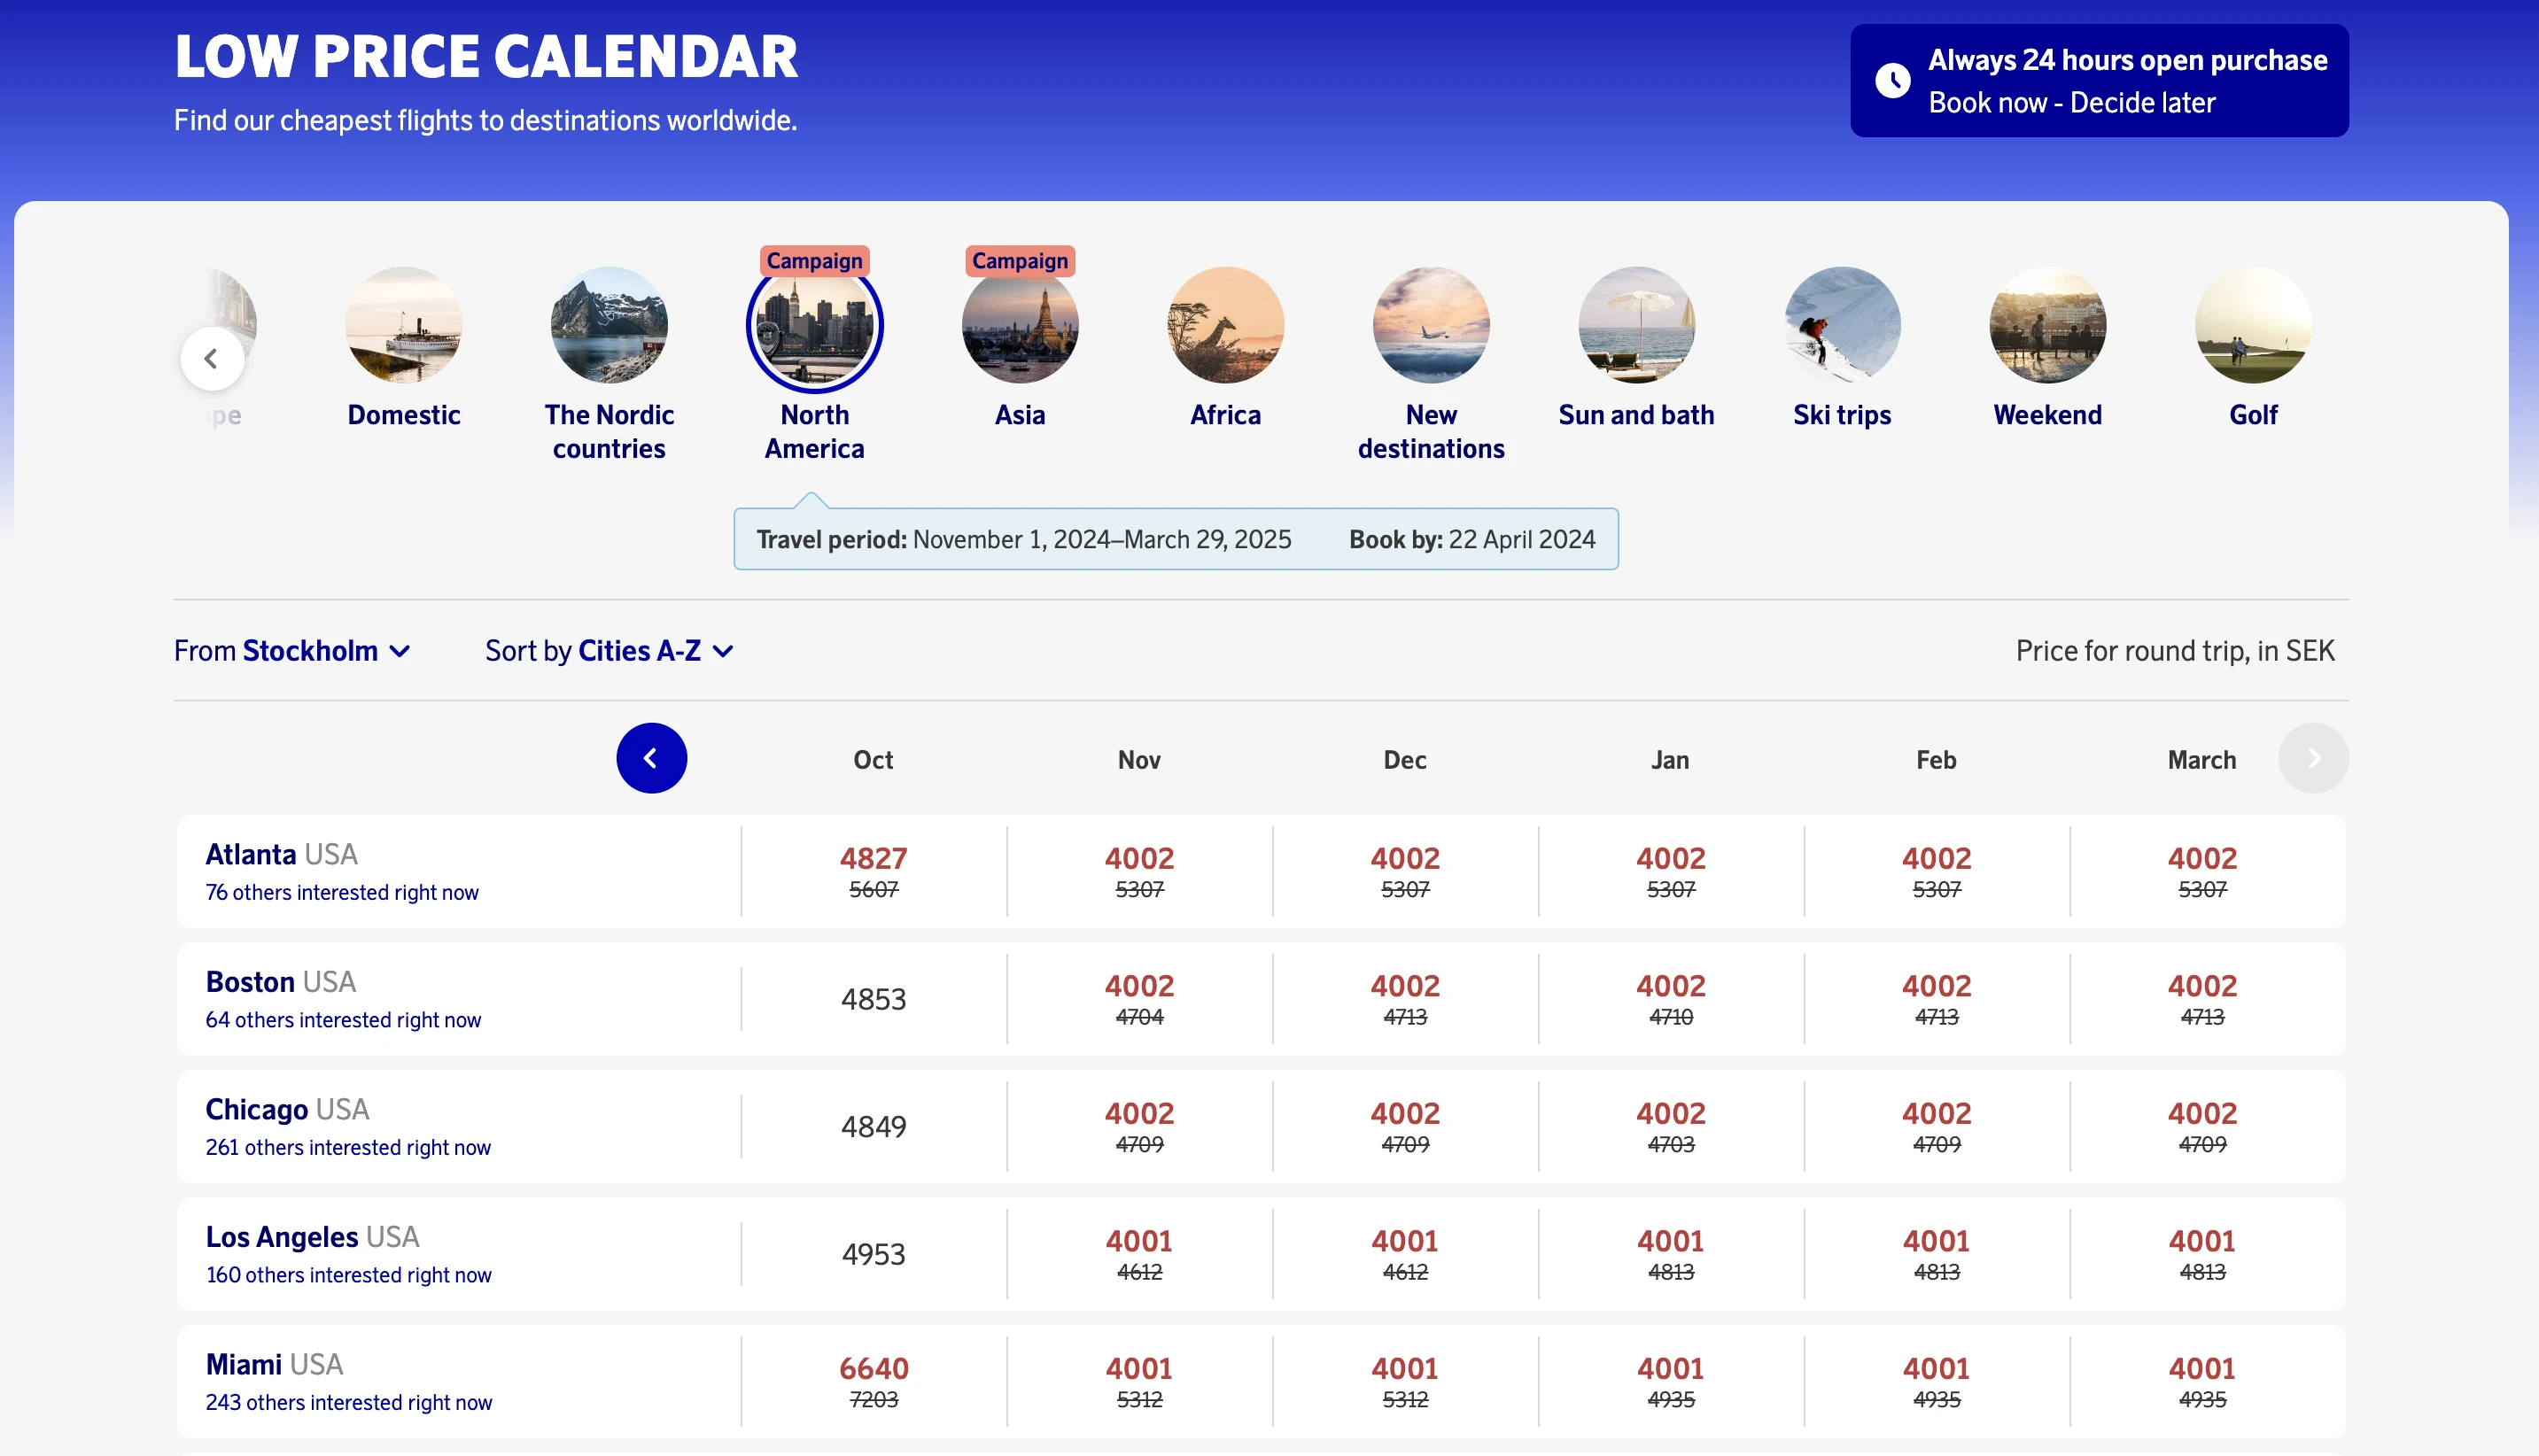 SAS low price calendar with discounts on SAS flights to the US and Asia (April 2024)